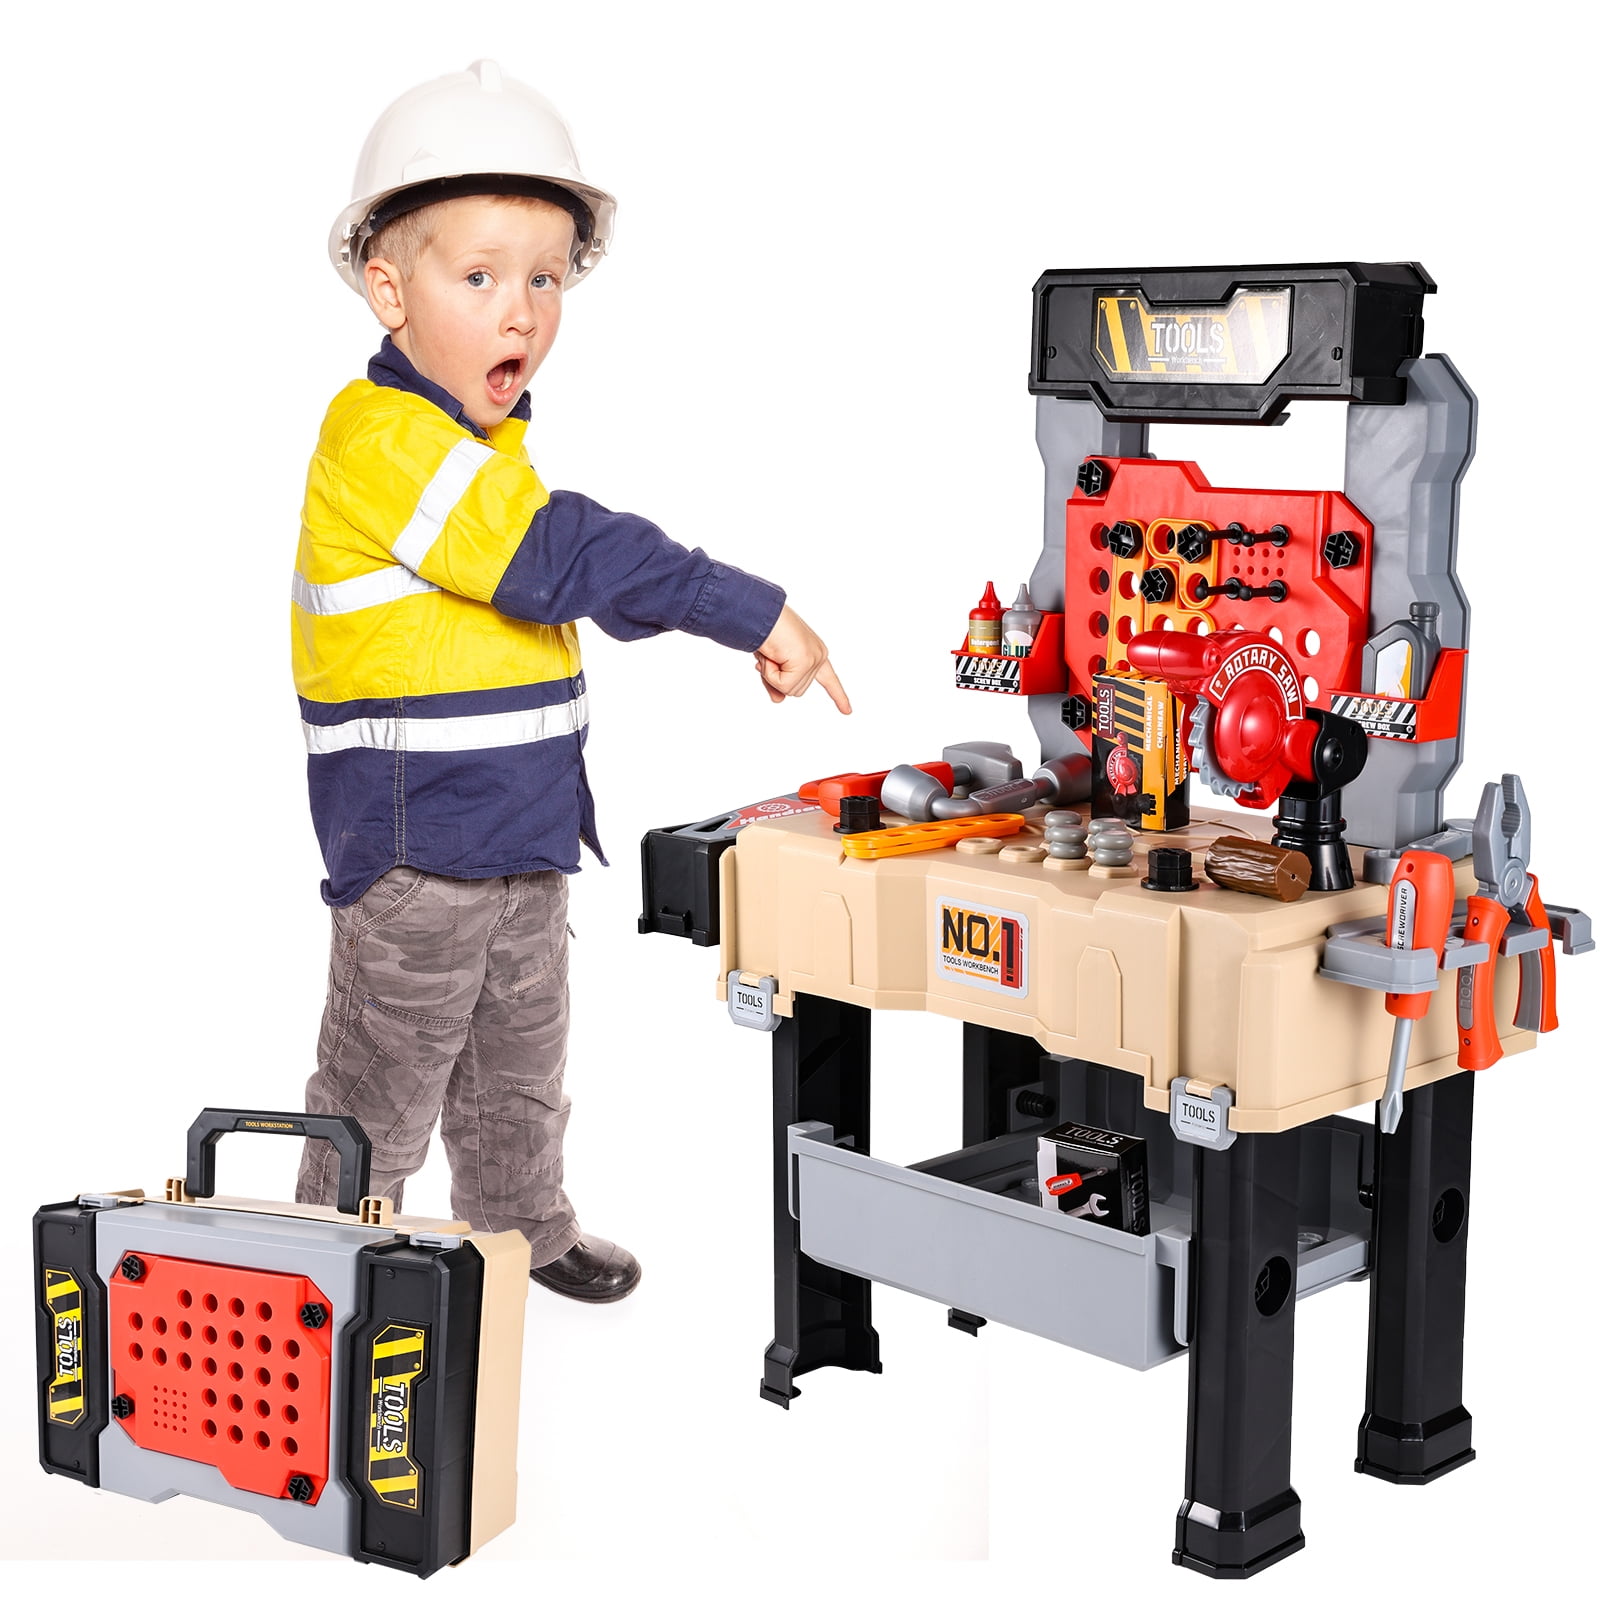 Black & Decker Junior Play Workbench - with 24 Toy Tools and